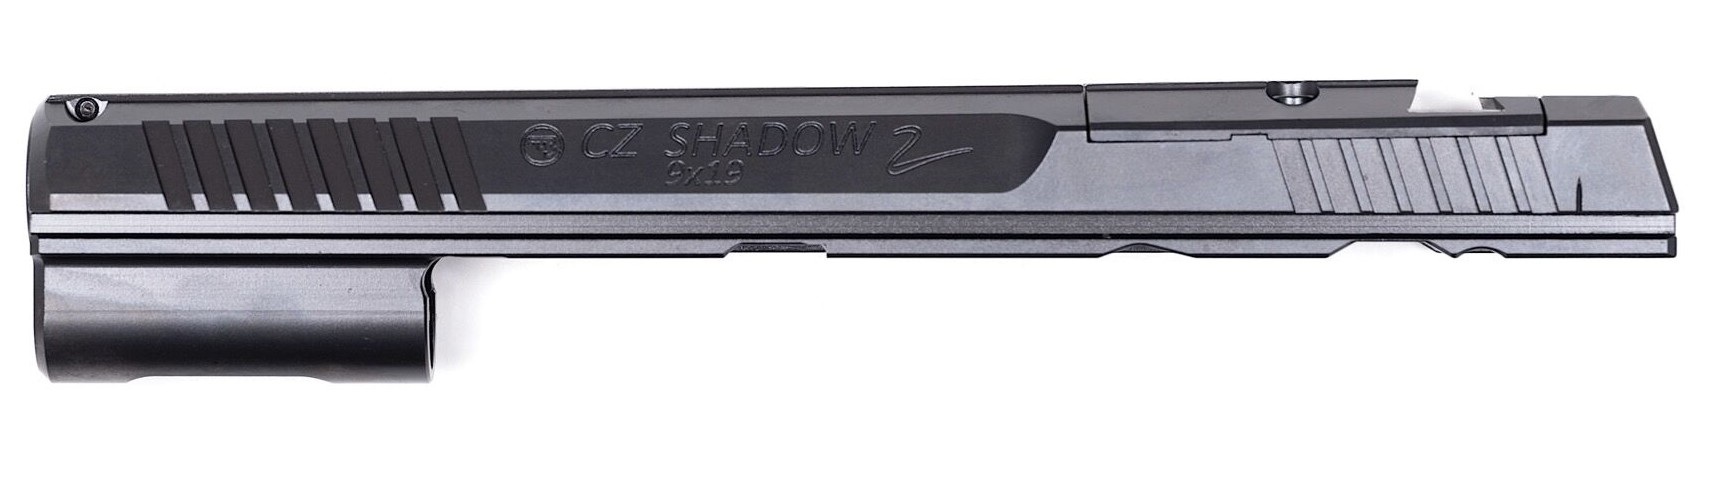 CZ SHADOW 2 OPTIC READY SLIDE ONLY - Montreal Firearms Recreational Center